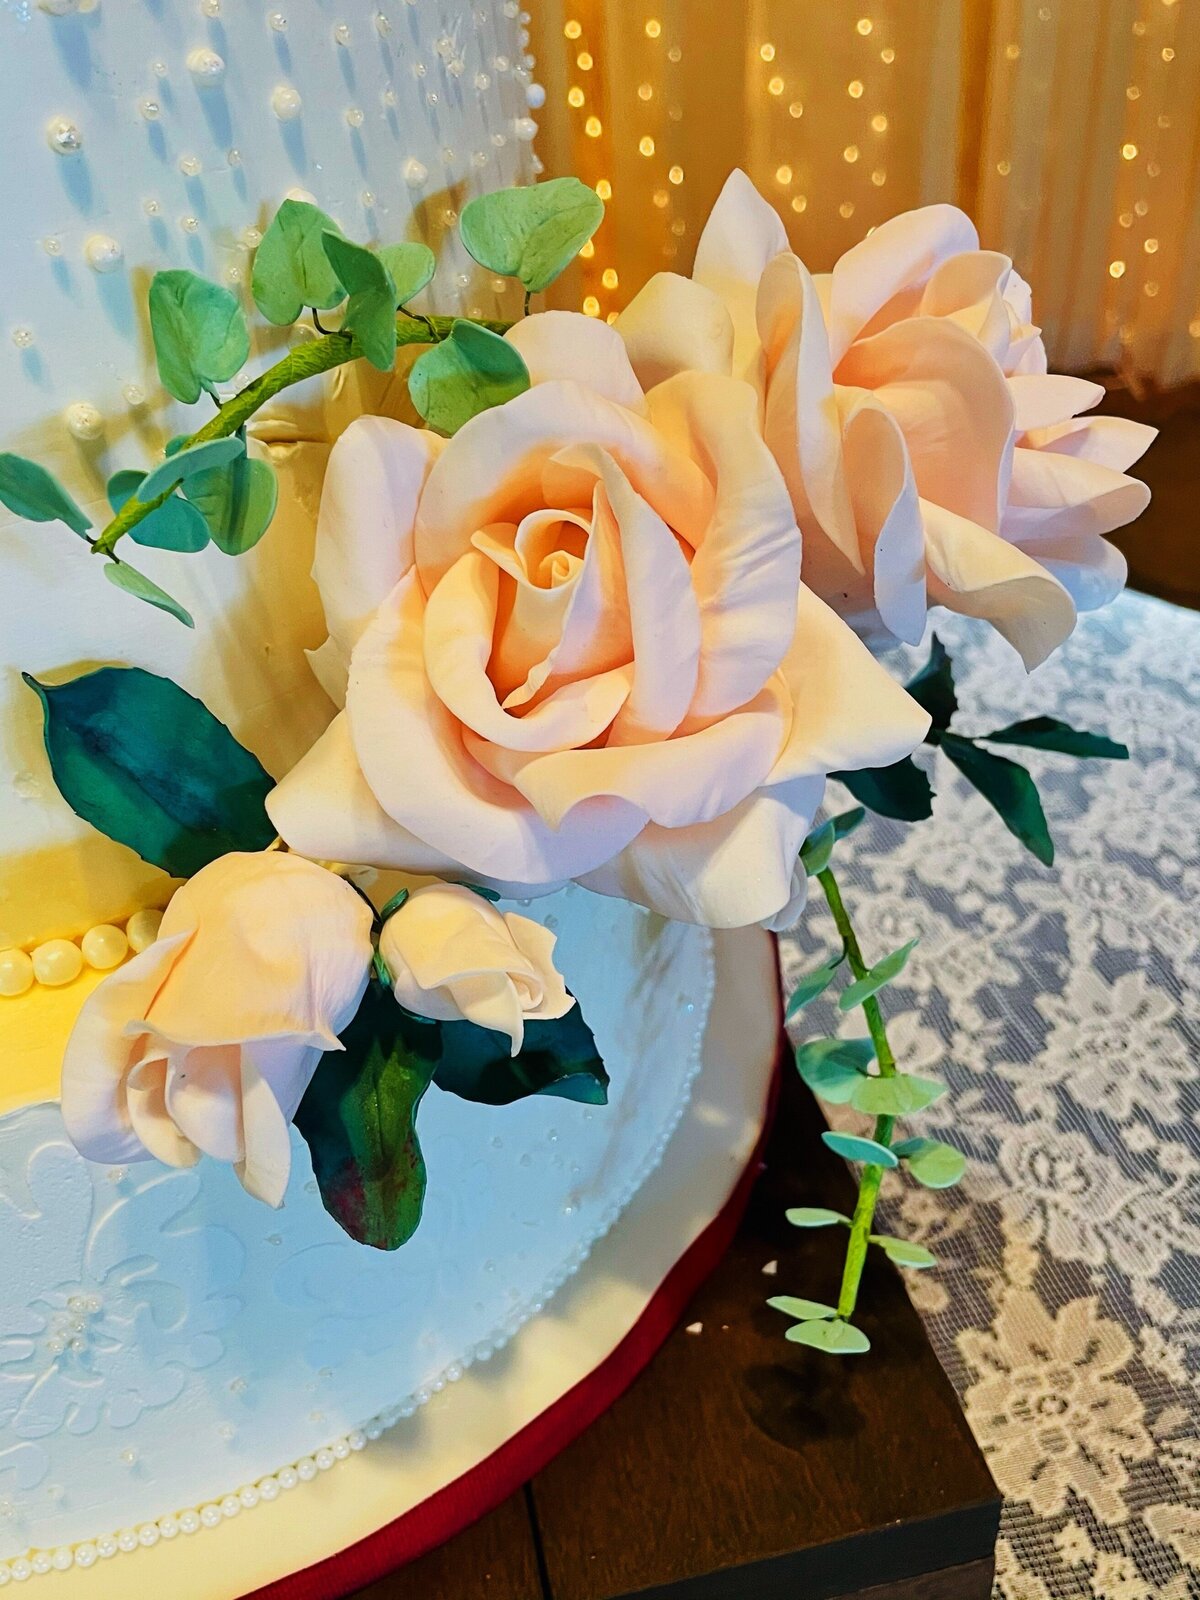 Sugar roses and rose buds in pale blush